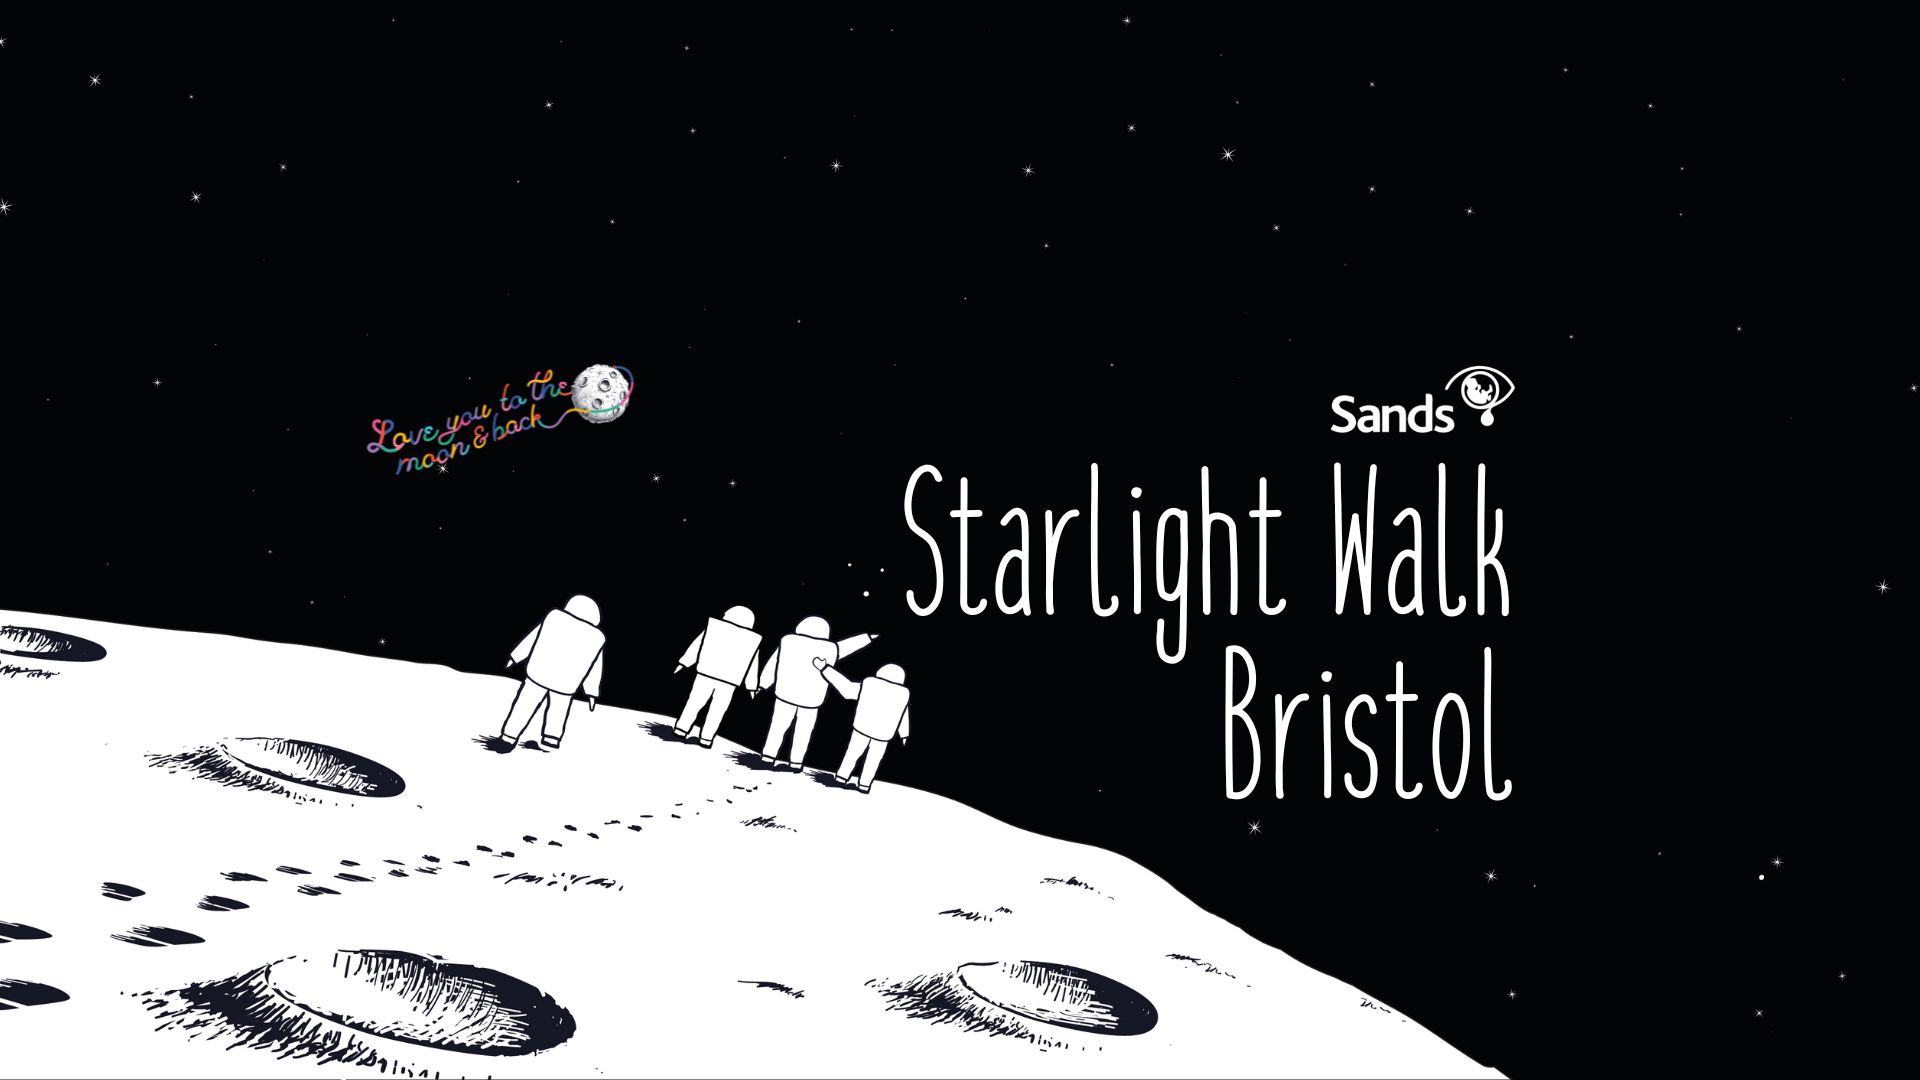 Four astronauts holding hands walking on the moon whilst looking up the stars. Stalrlight Walk Bristol is written in the sky